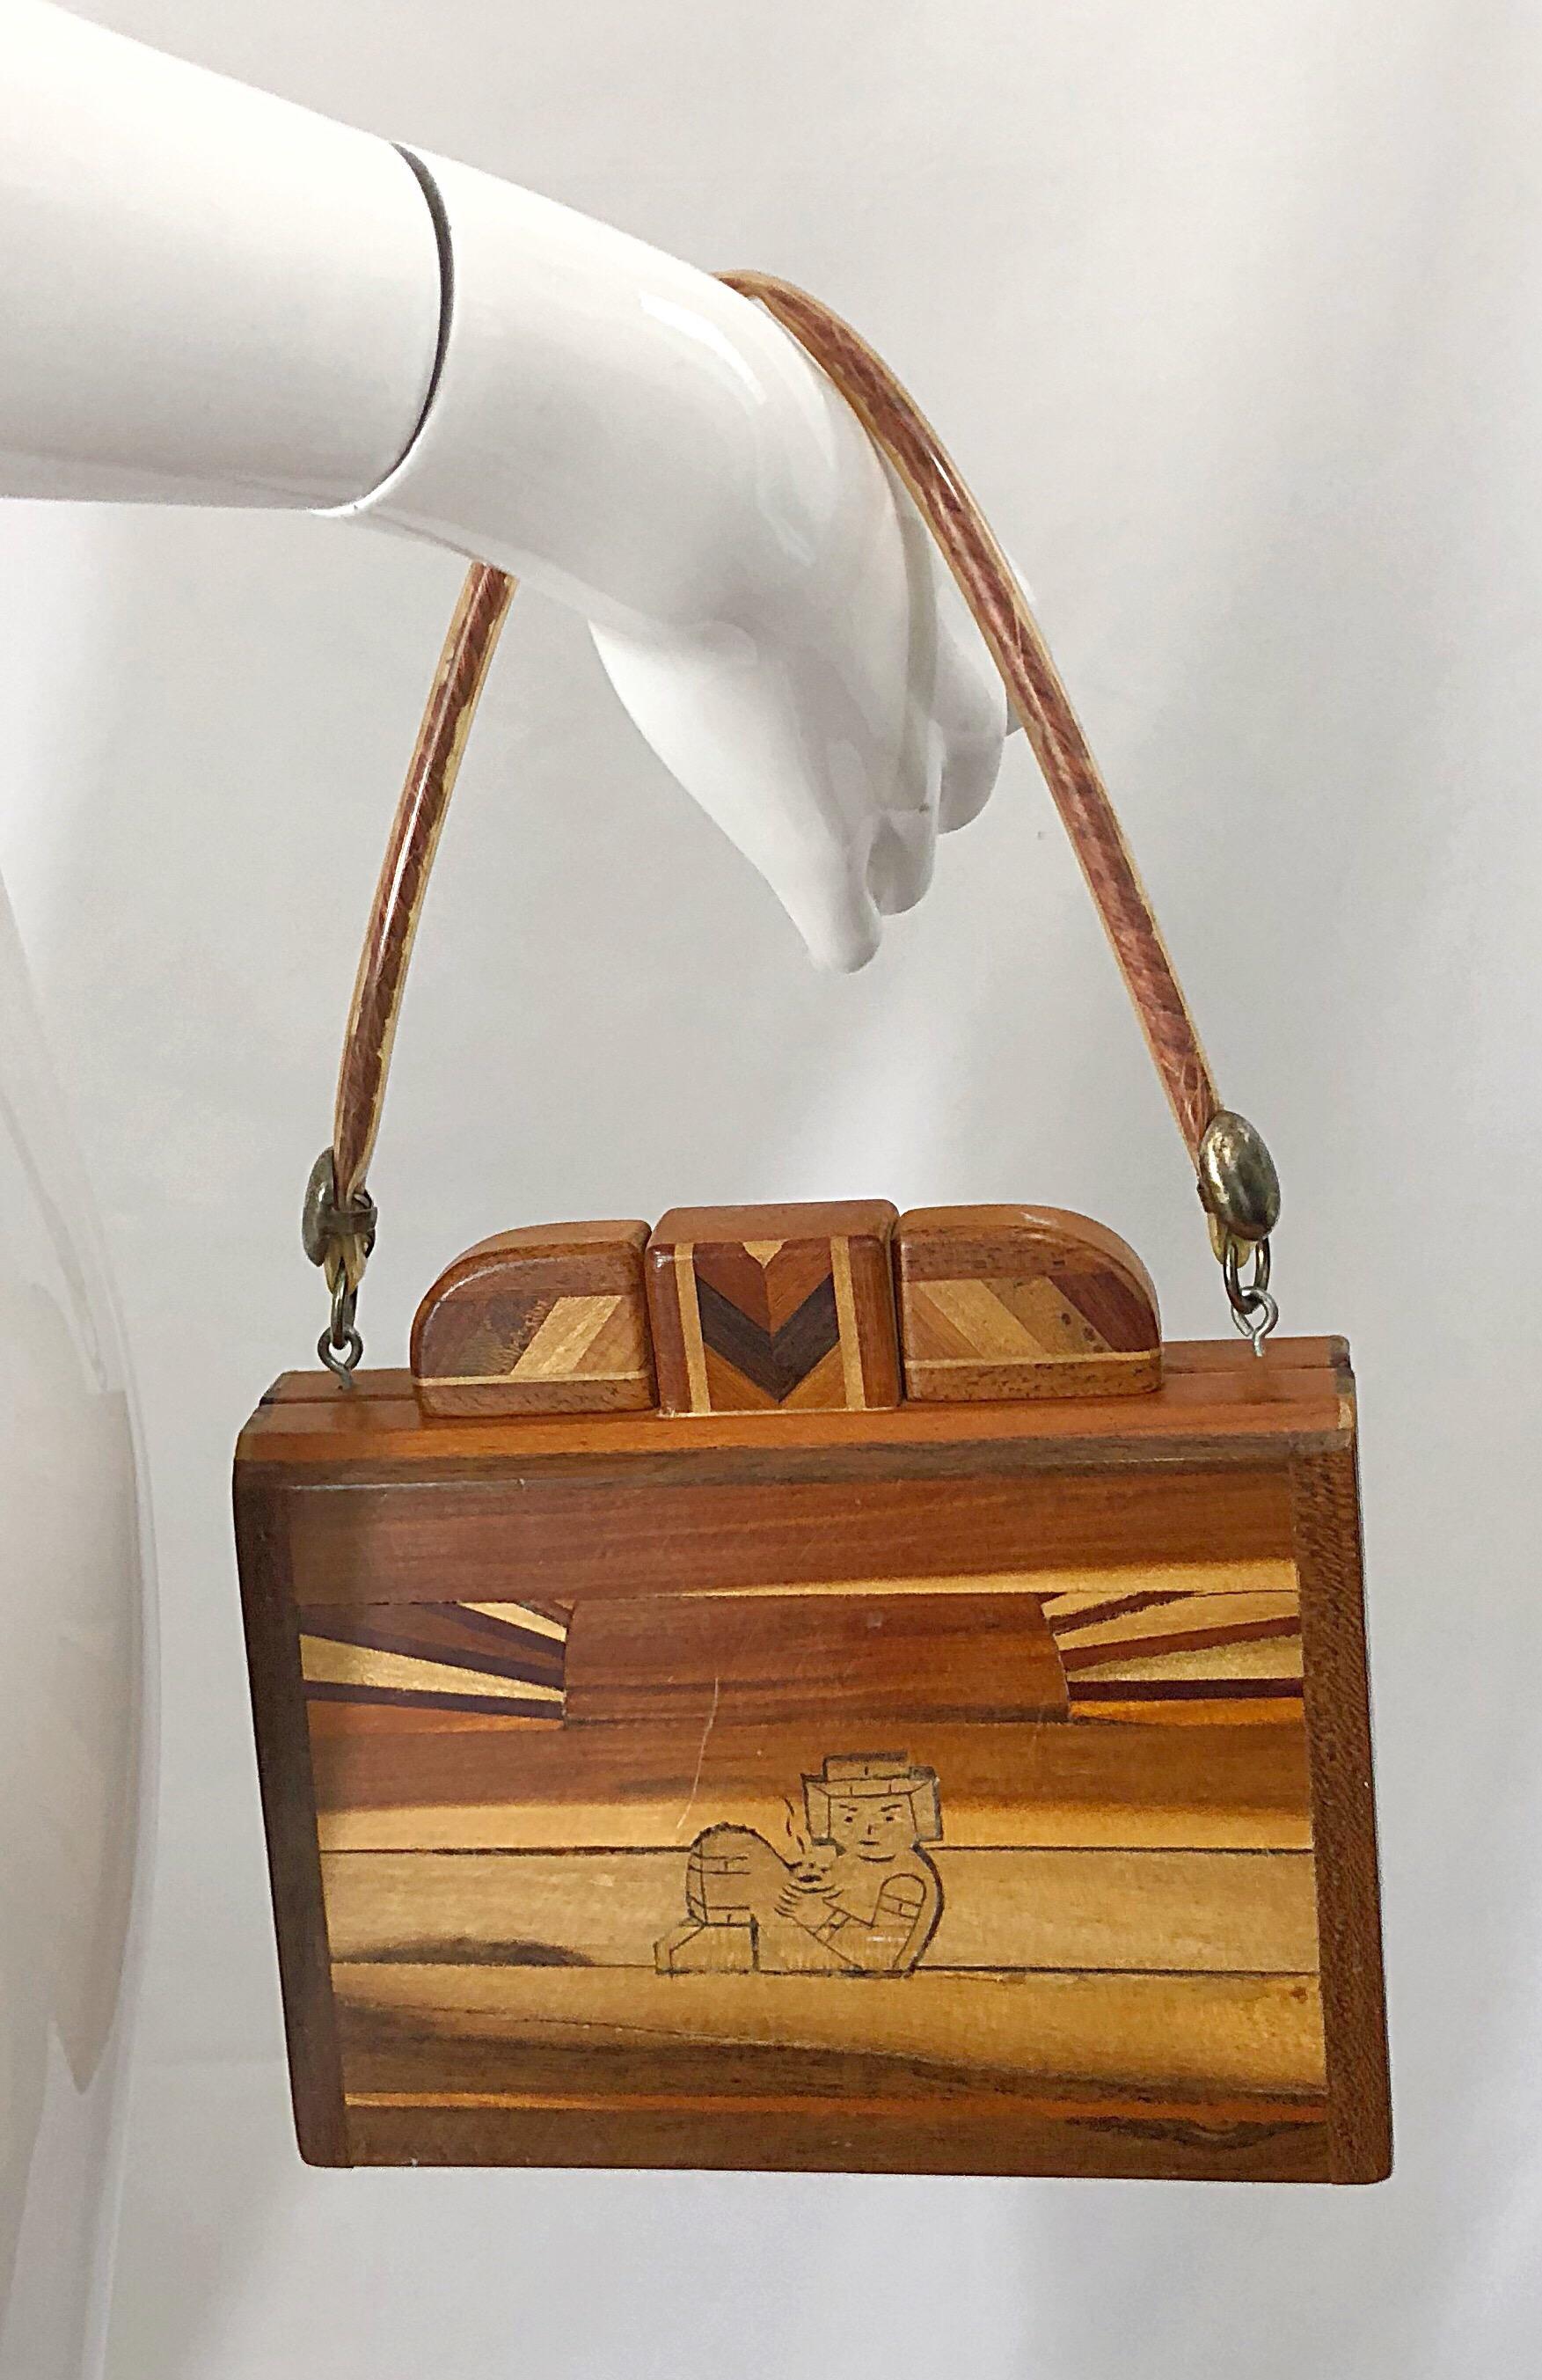 Chic 1960 wooden patchwork novelty bag of various shades on one side, and an Egyptian figure on the other side. Plastic covered handle. The perfect size that fits all the essentials (smartphone, makeup, wallet, etc.) In good condition, with minor